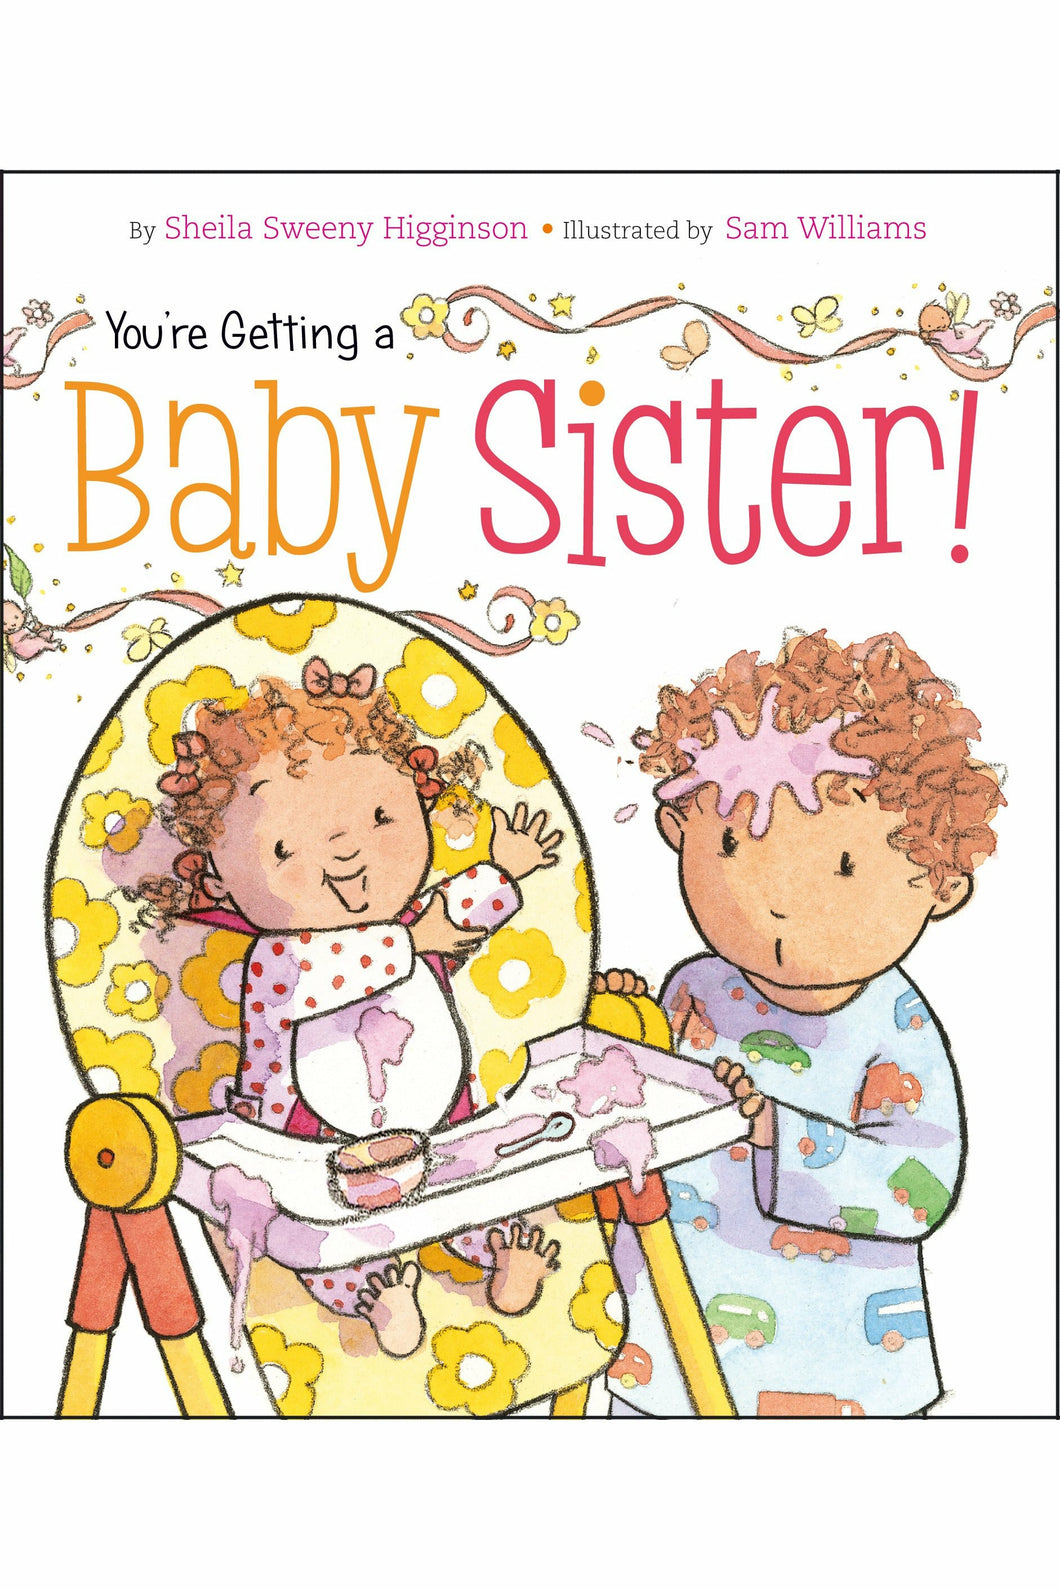 YOU'RE GETTING A GETTING A BABY SISTER